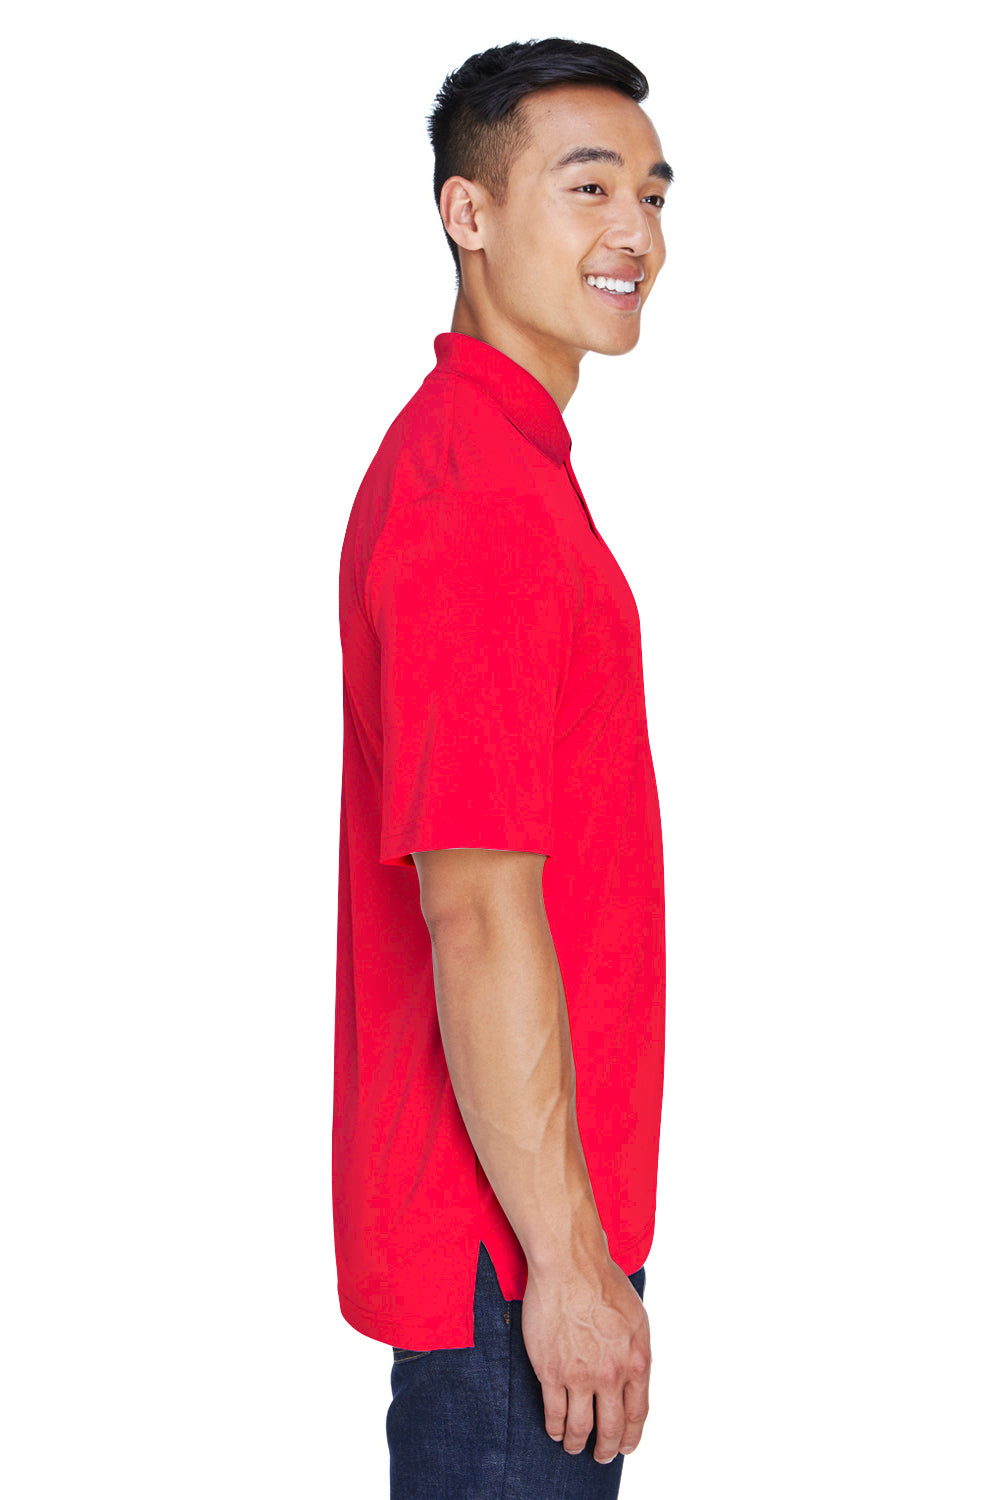 UltraClub 8405 Mens Cool & Dry Moisture Wicking Short Sleeve Polo Shirt Red Side